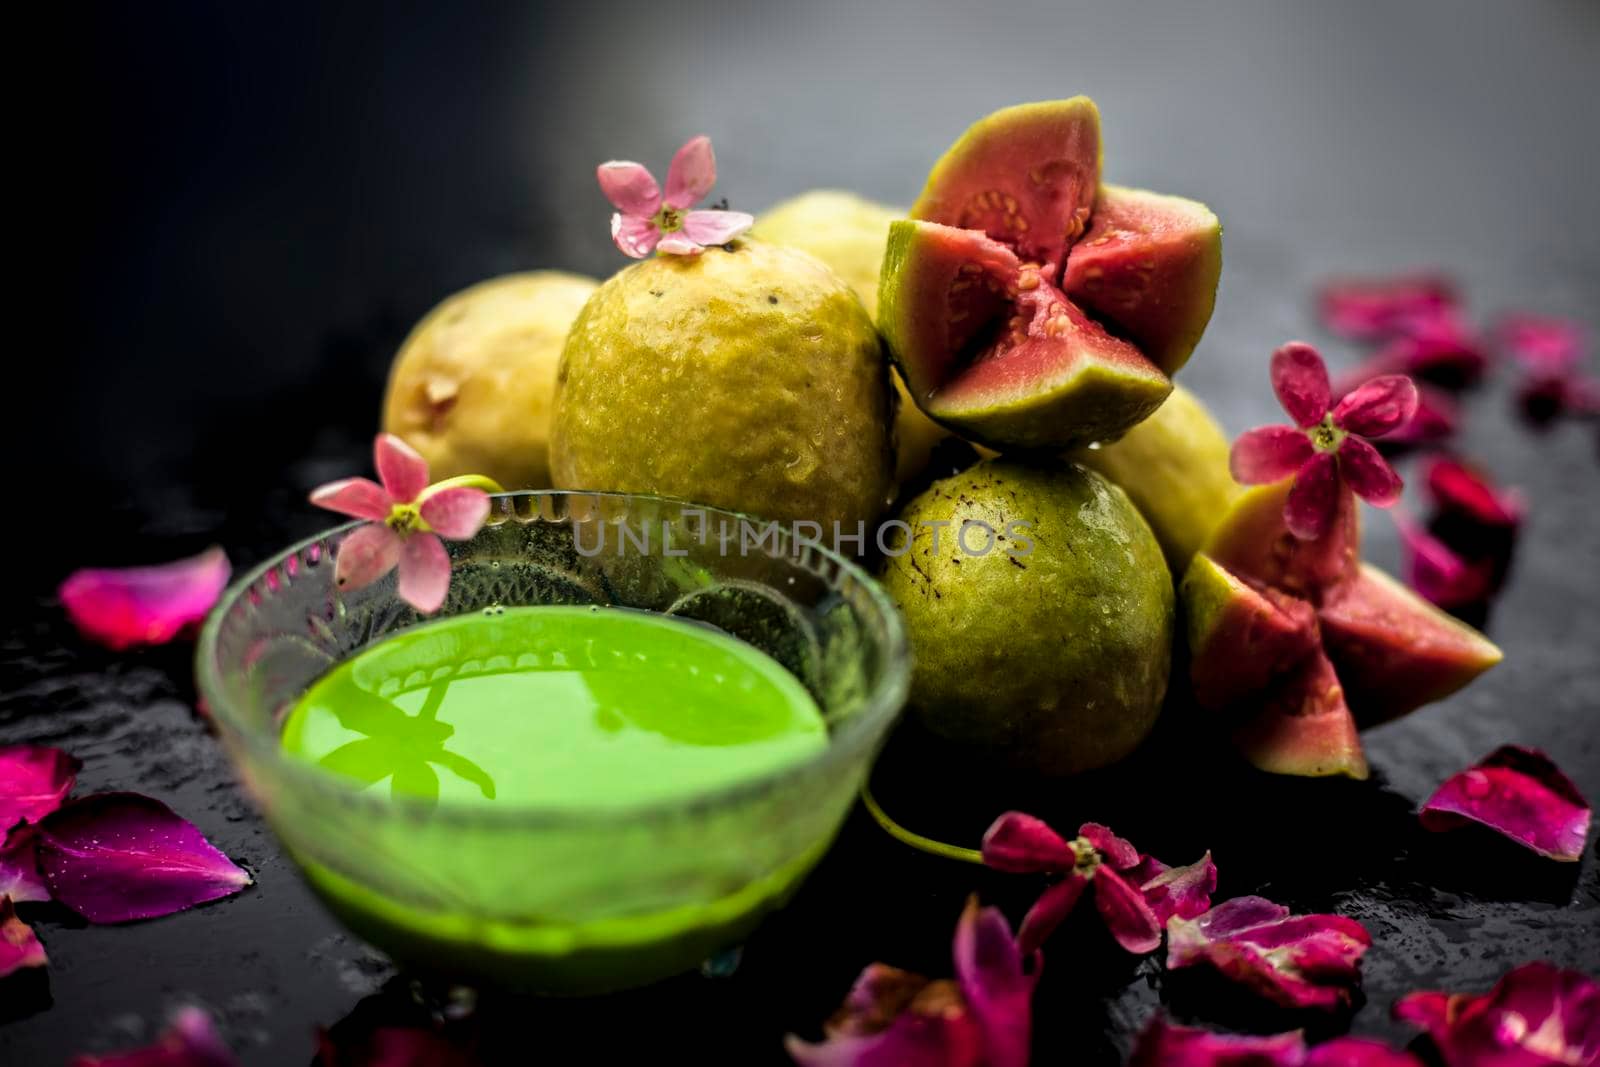 Guava, Neem or Indian lilac leaves, turmeric powder well mixed in a glass bowl for treatment of pimples and acne in the spa by beauticians. by mirzamlk